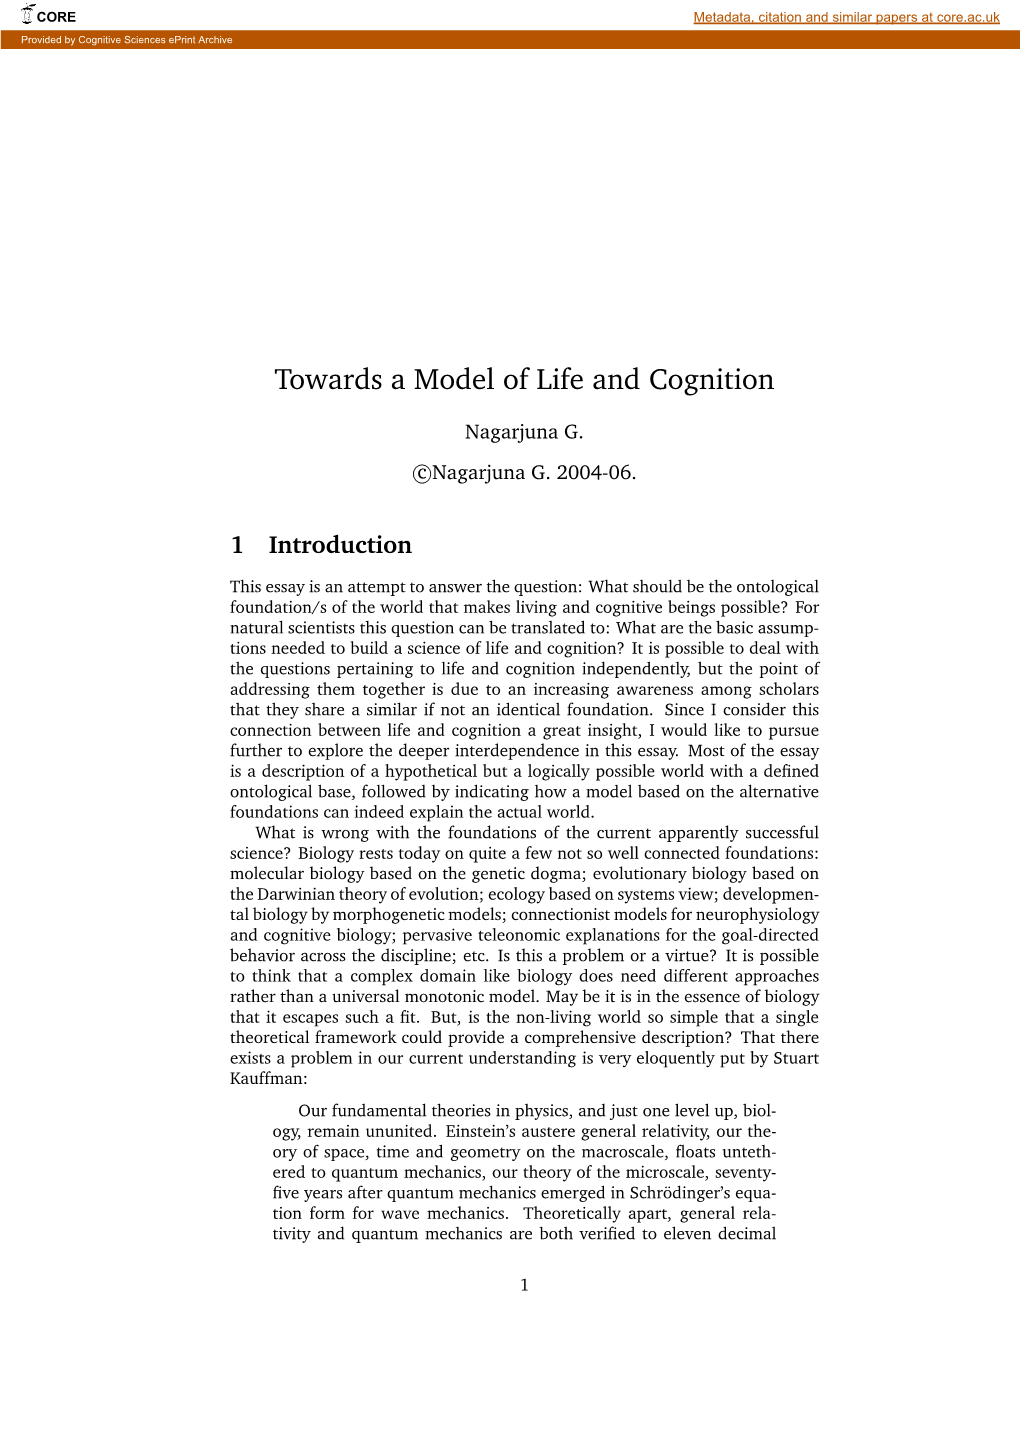 Towards a Model of Life and Cognition